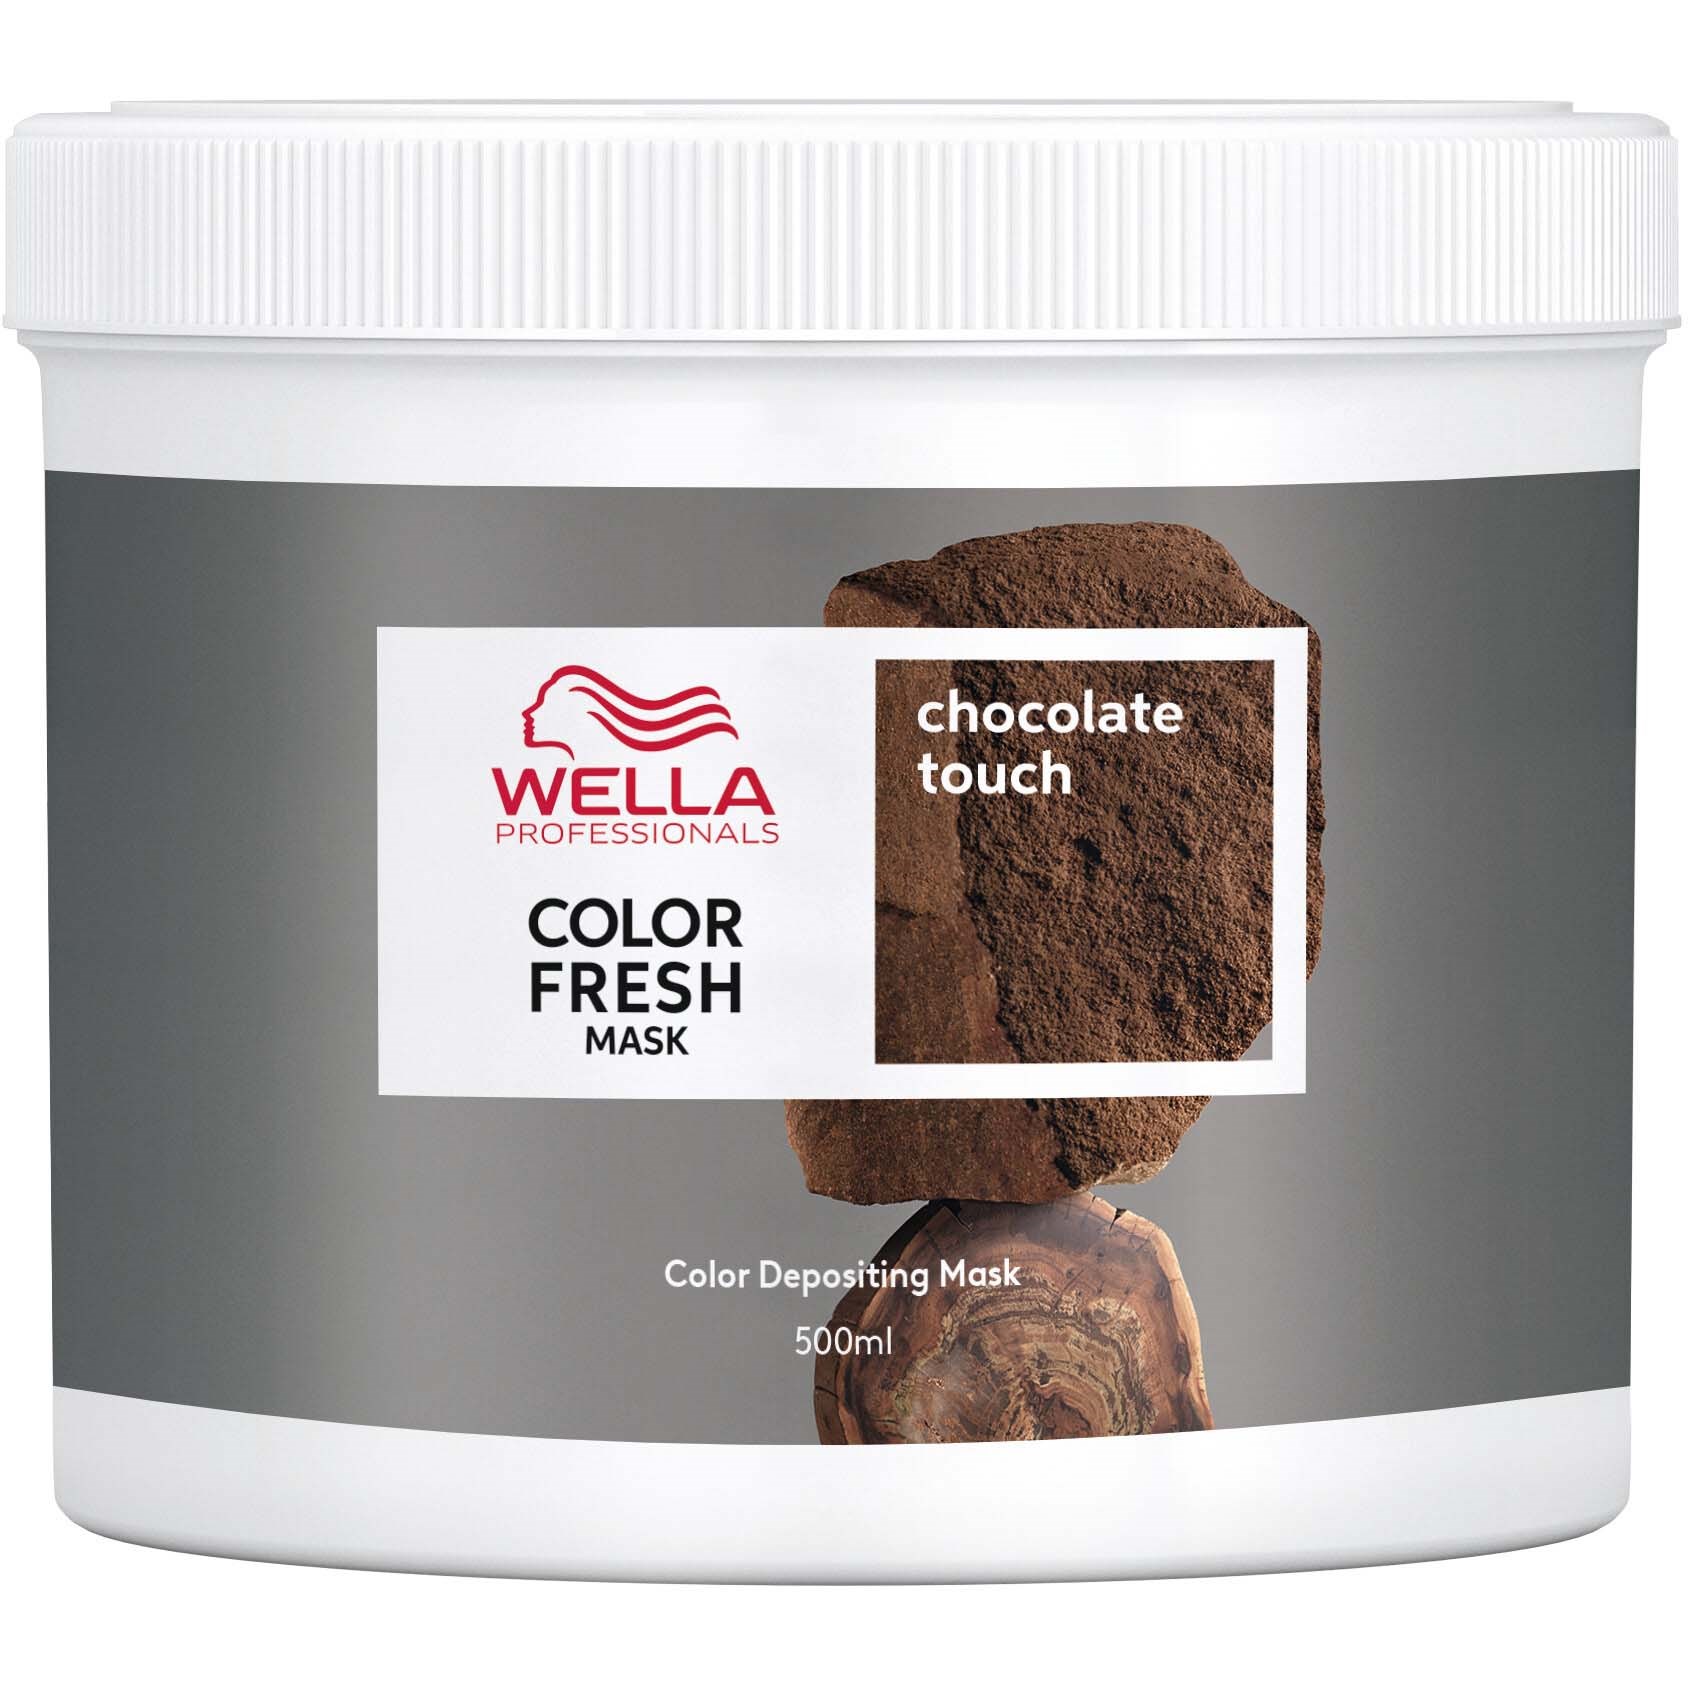 Läs mer om Wella Professionals Color Fresh Mask Chocolate Touch